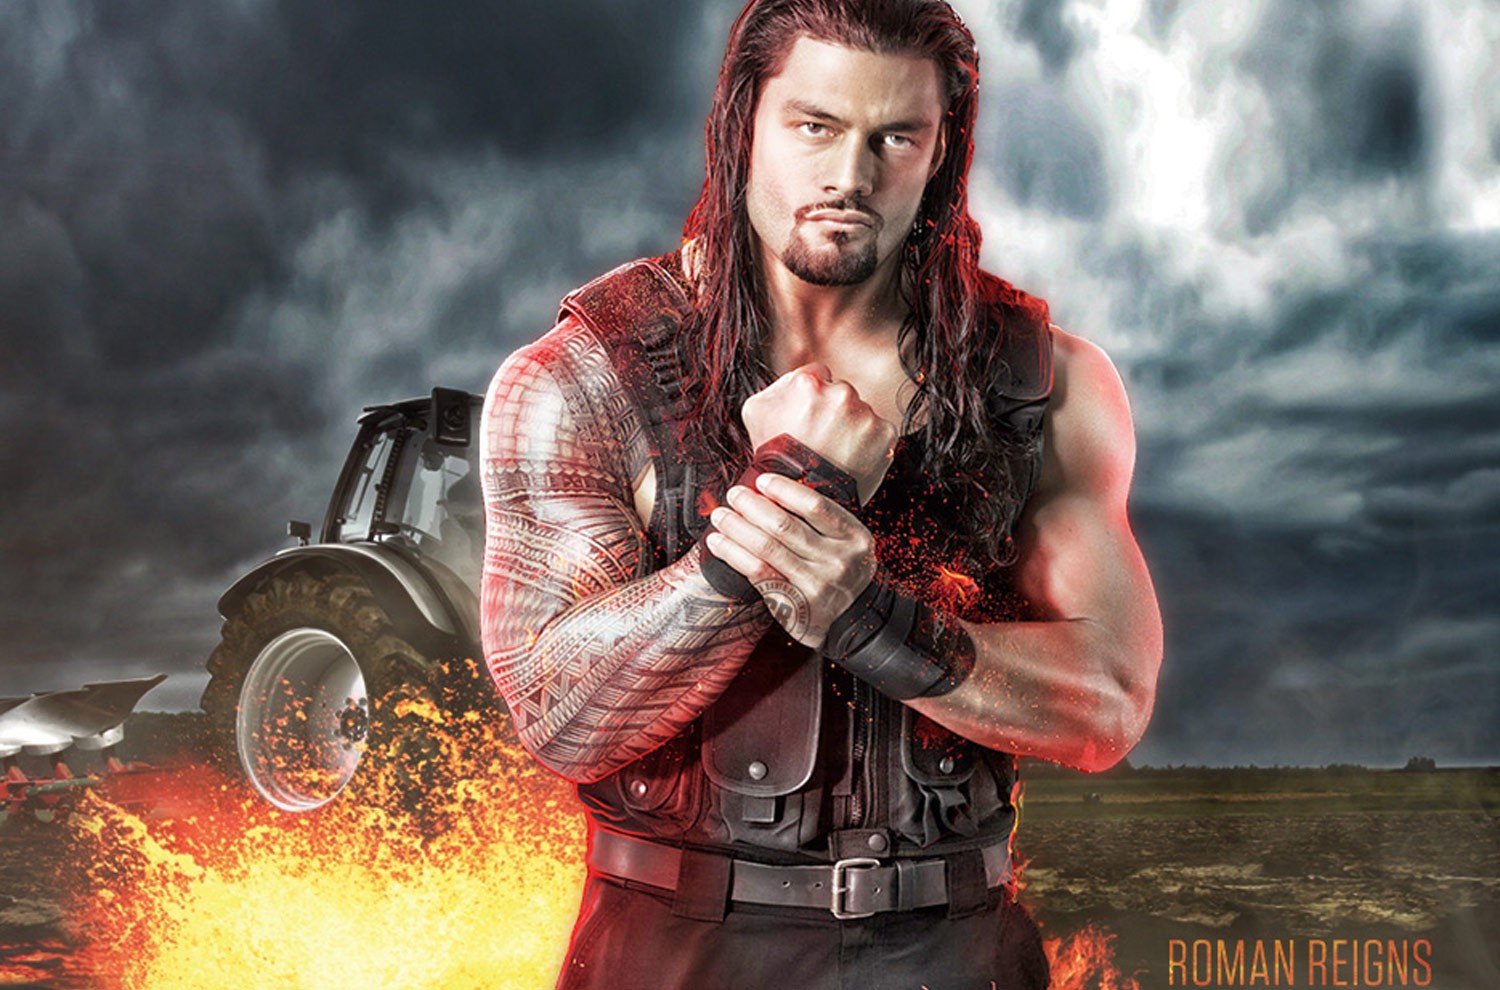 Roman Reigns Wwe Superstar Full HD Wallpaper For Your Pc And Mac